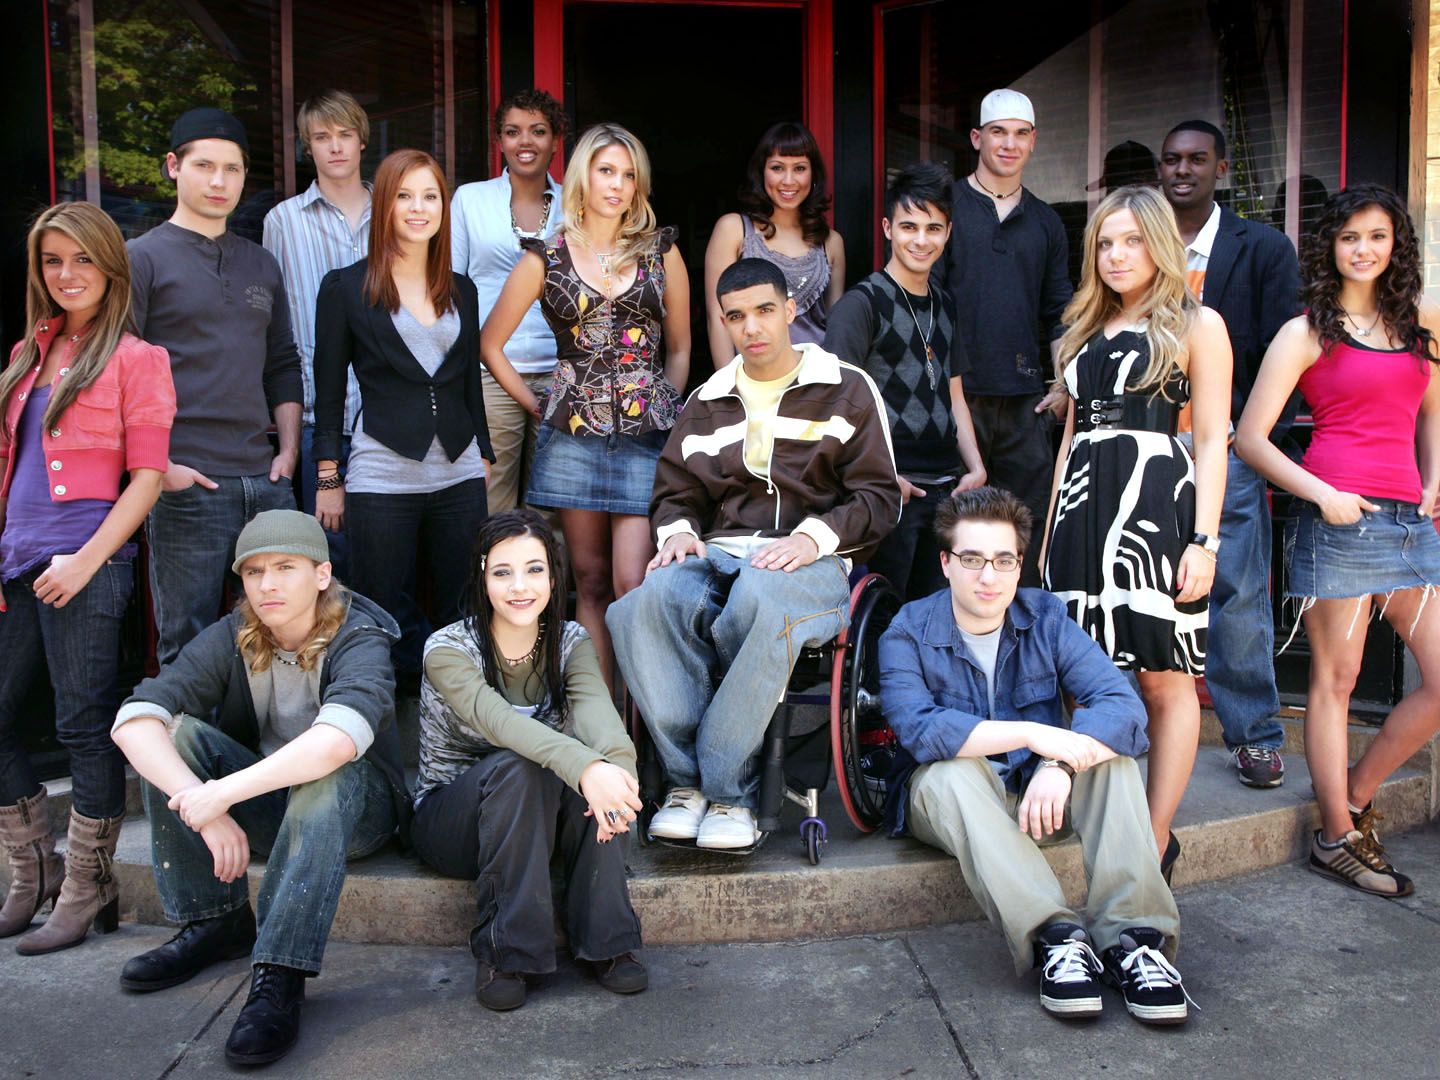 The 239 Issues Tackled by Degrassi Over Twelve Seasons